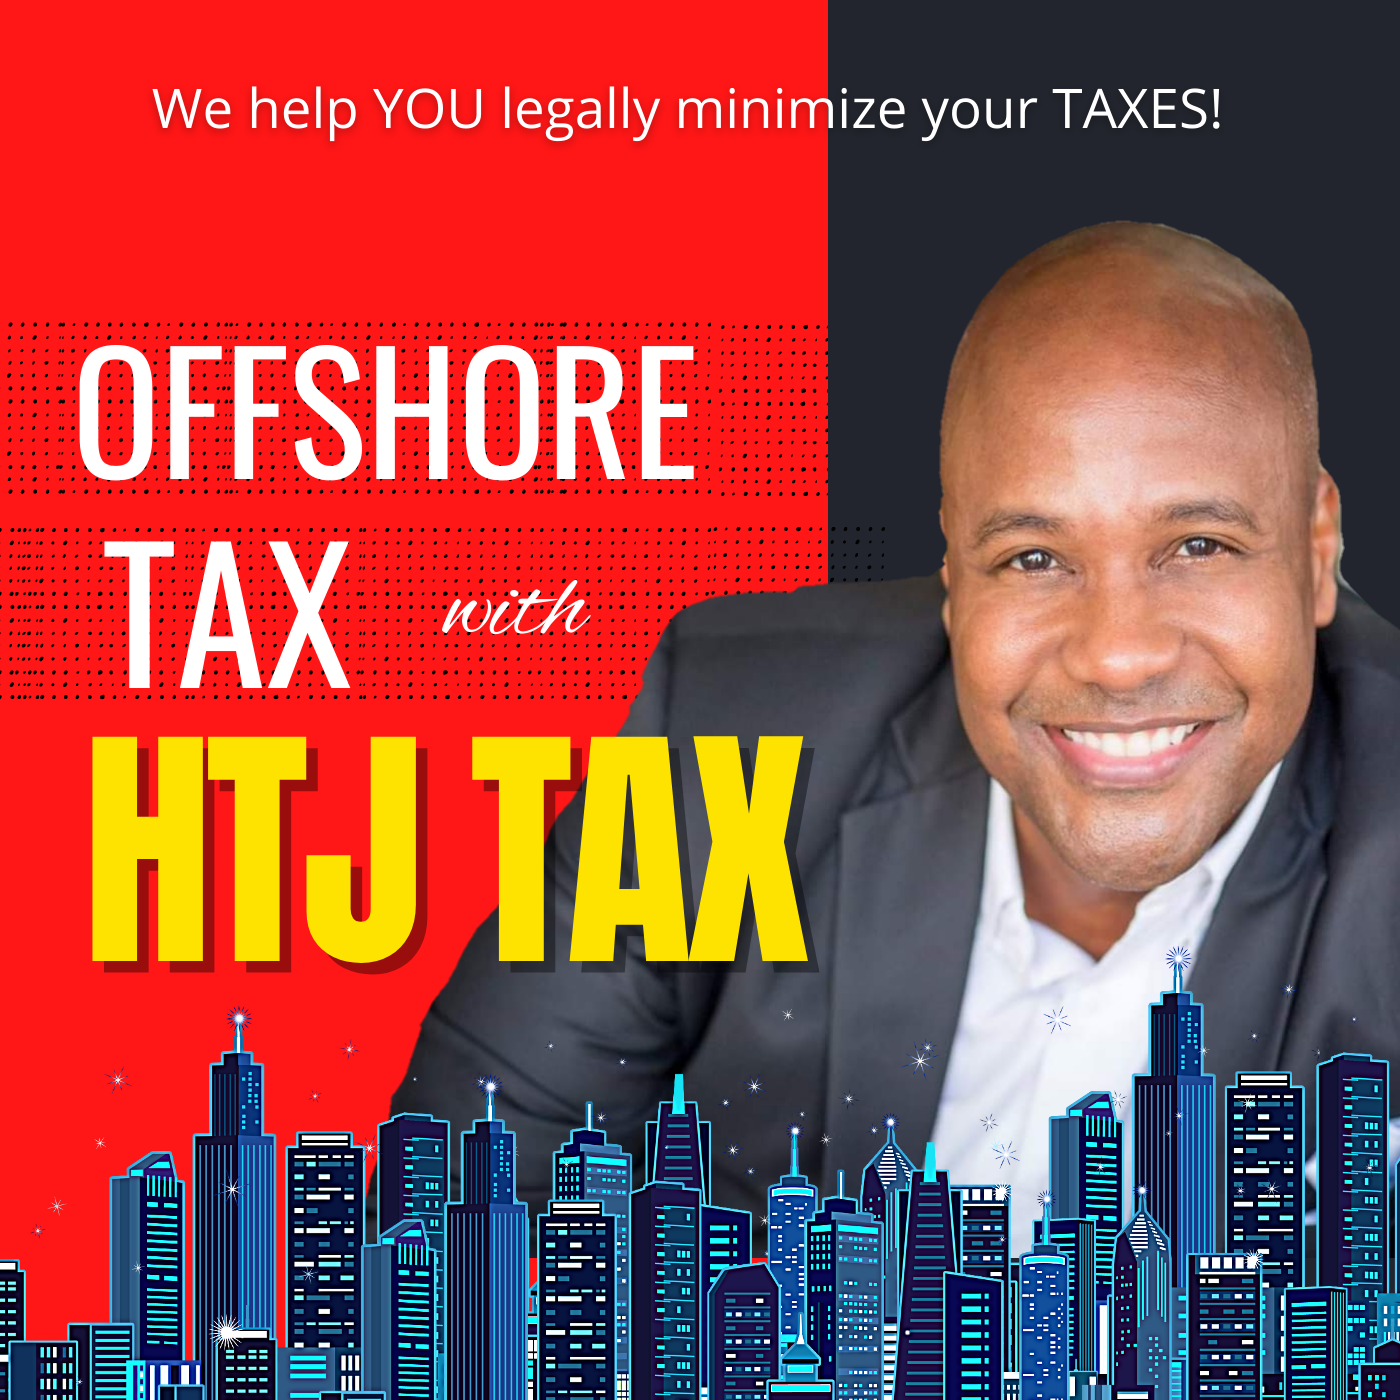 Artwork for Offshore Tax with HTJ.tax